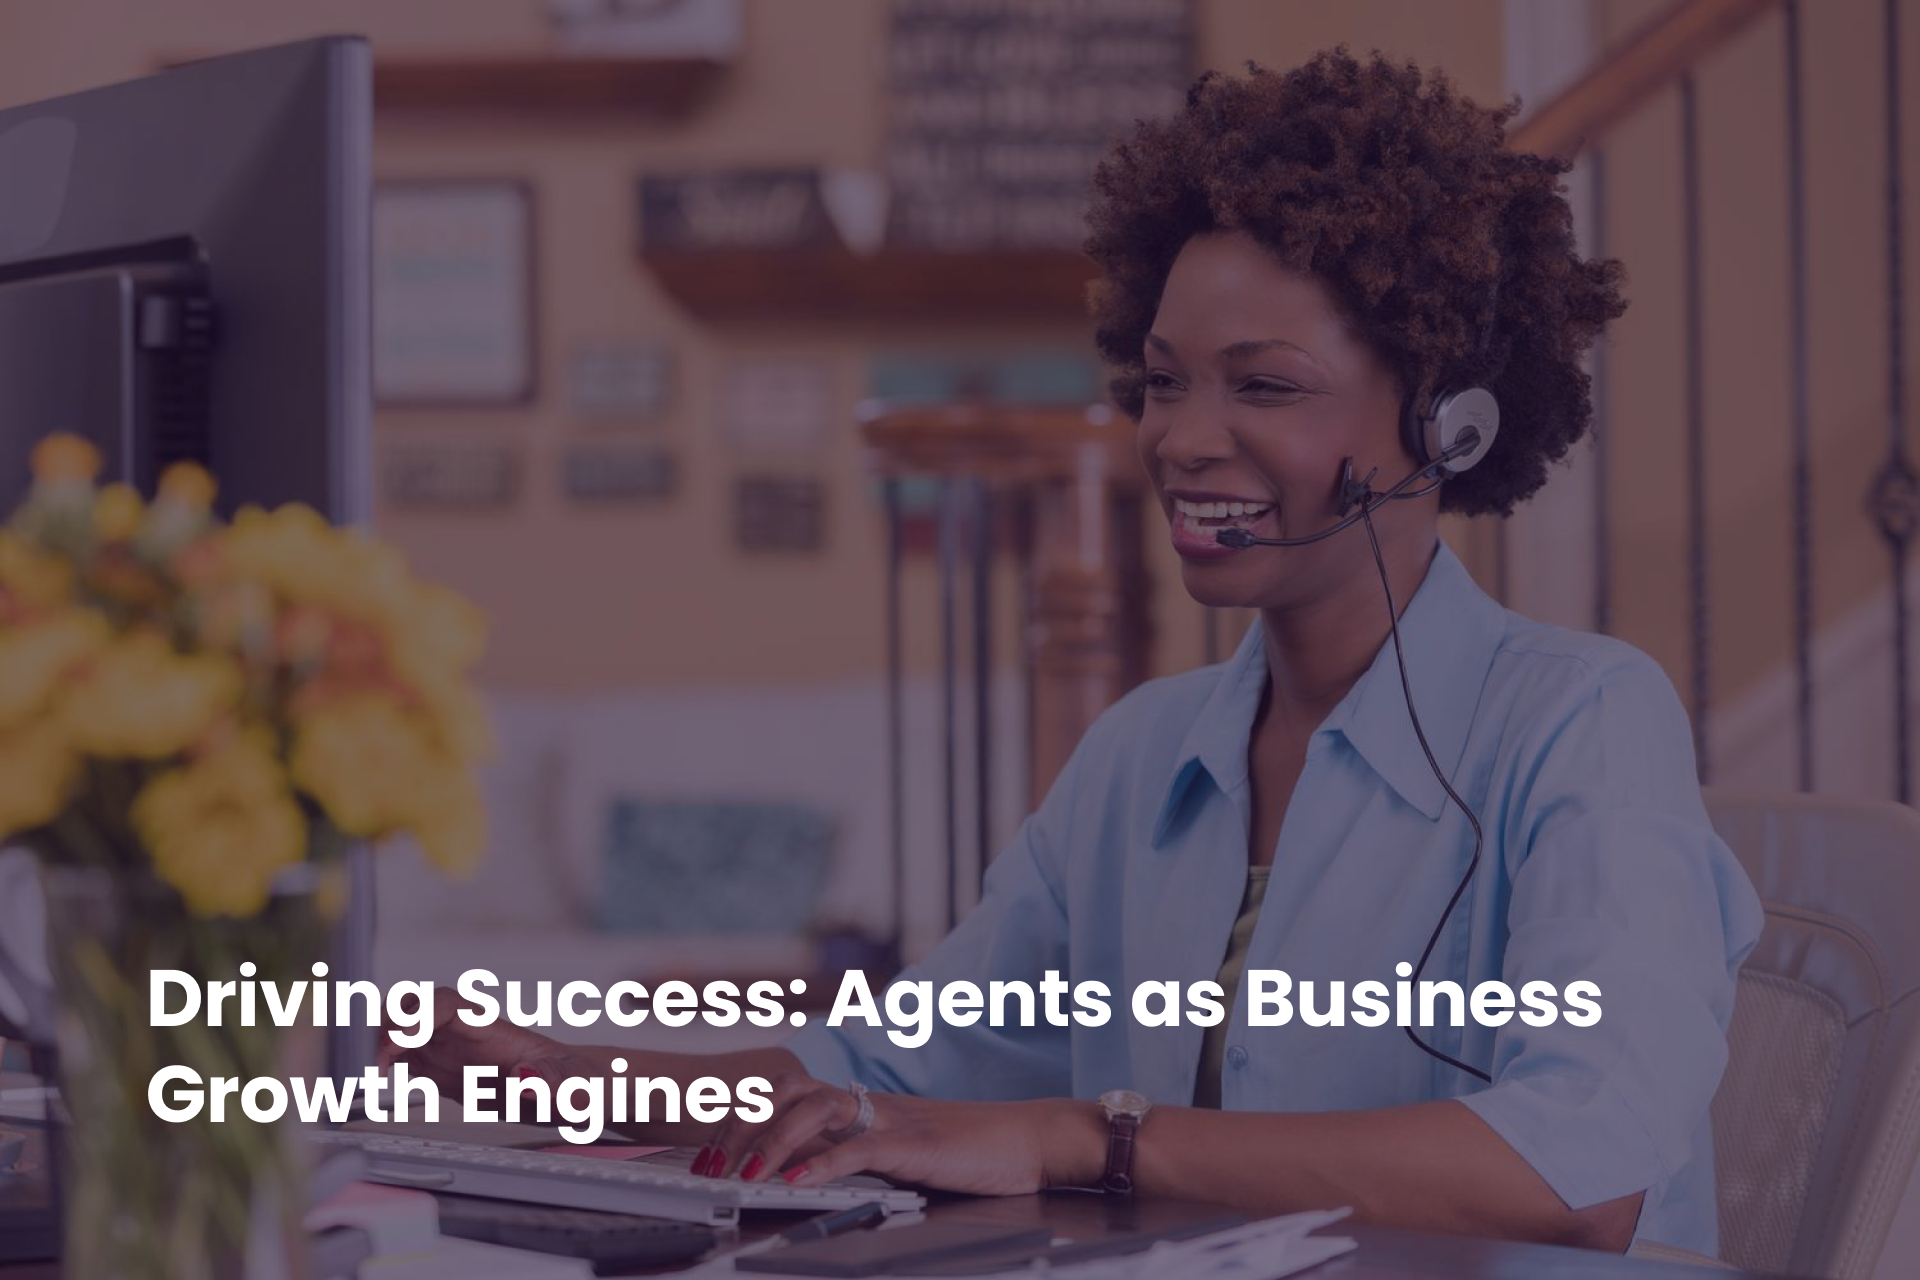 Driving Success: Agents as Business Growth Engines